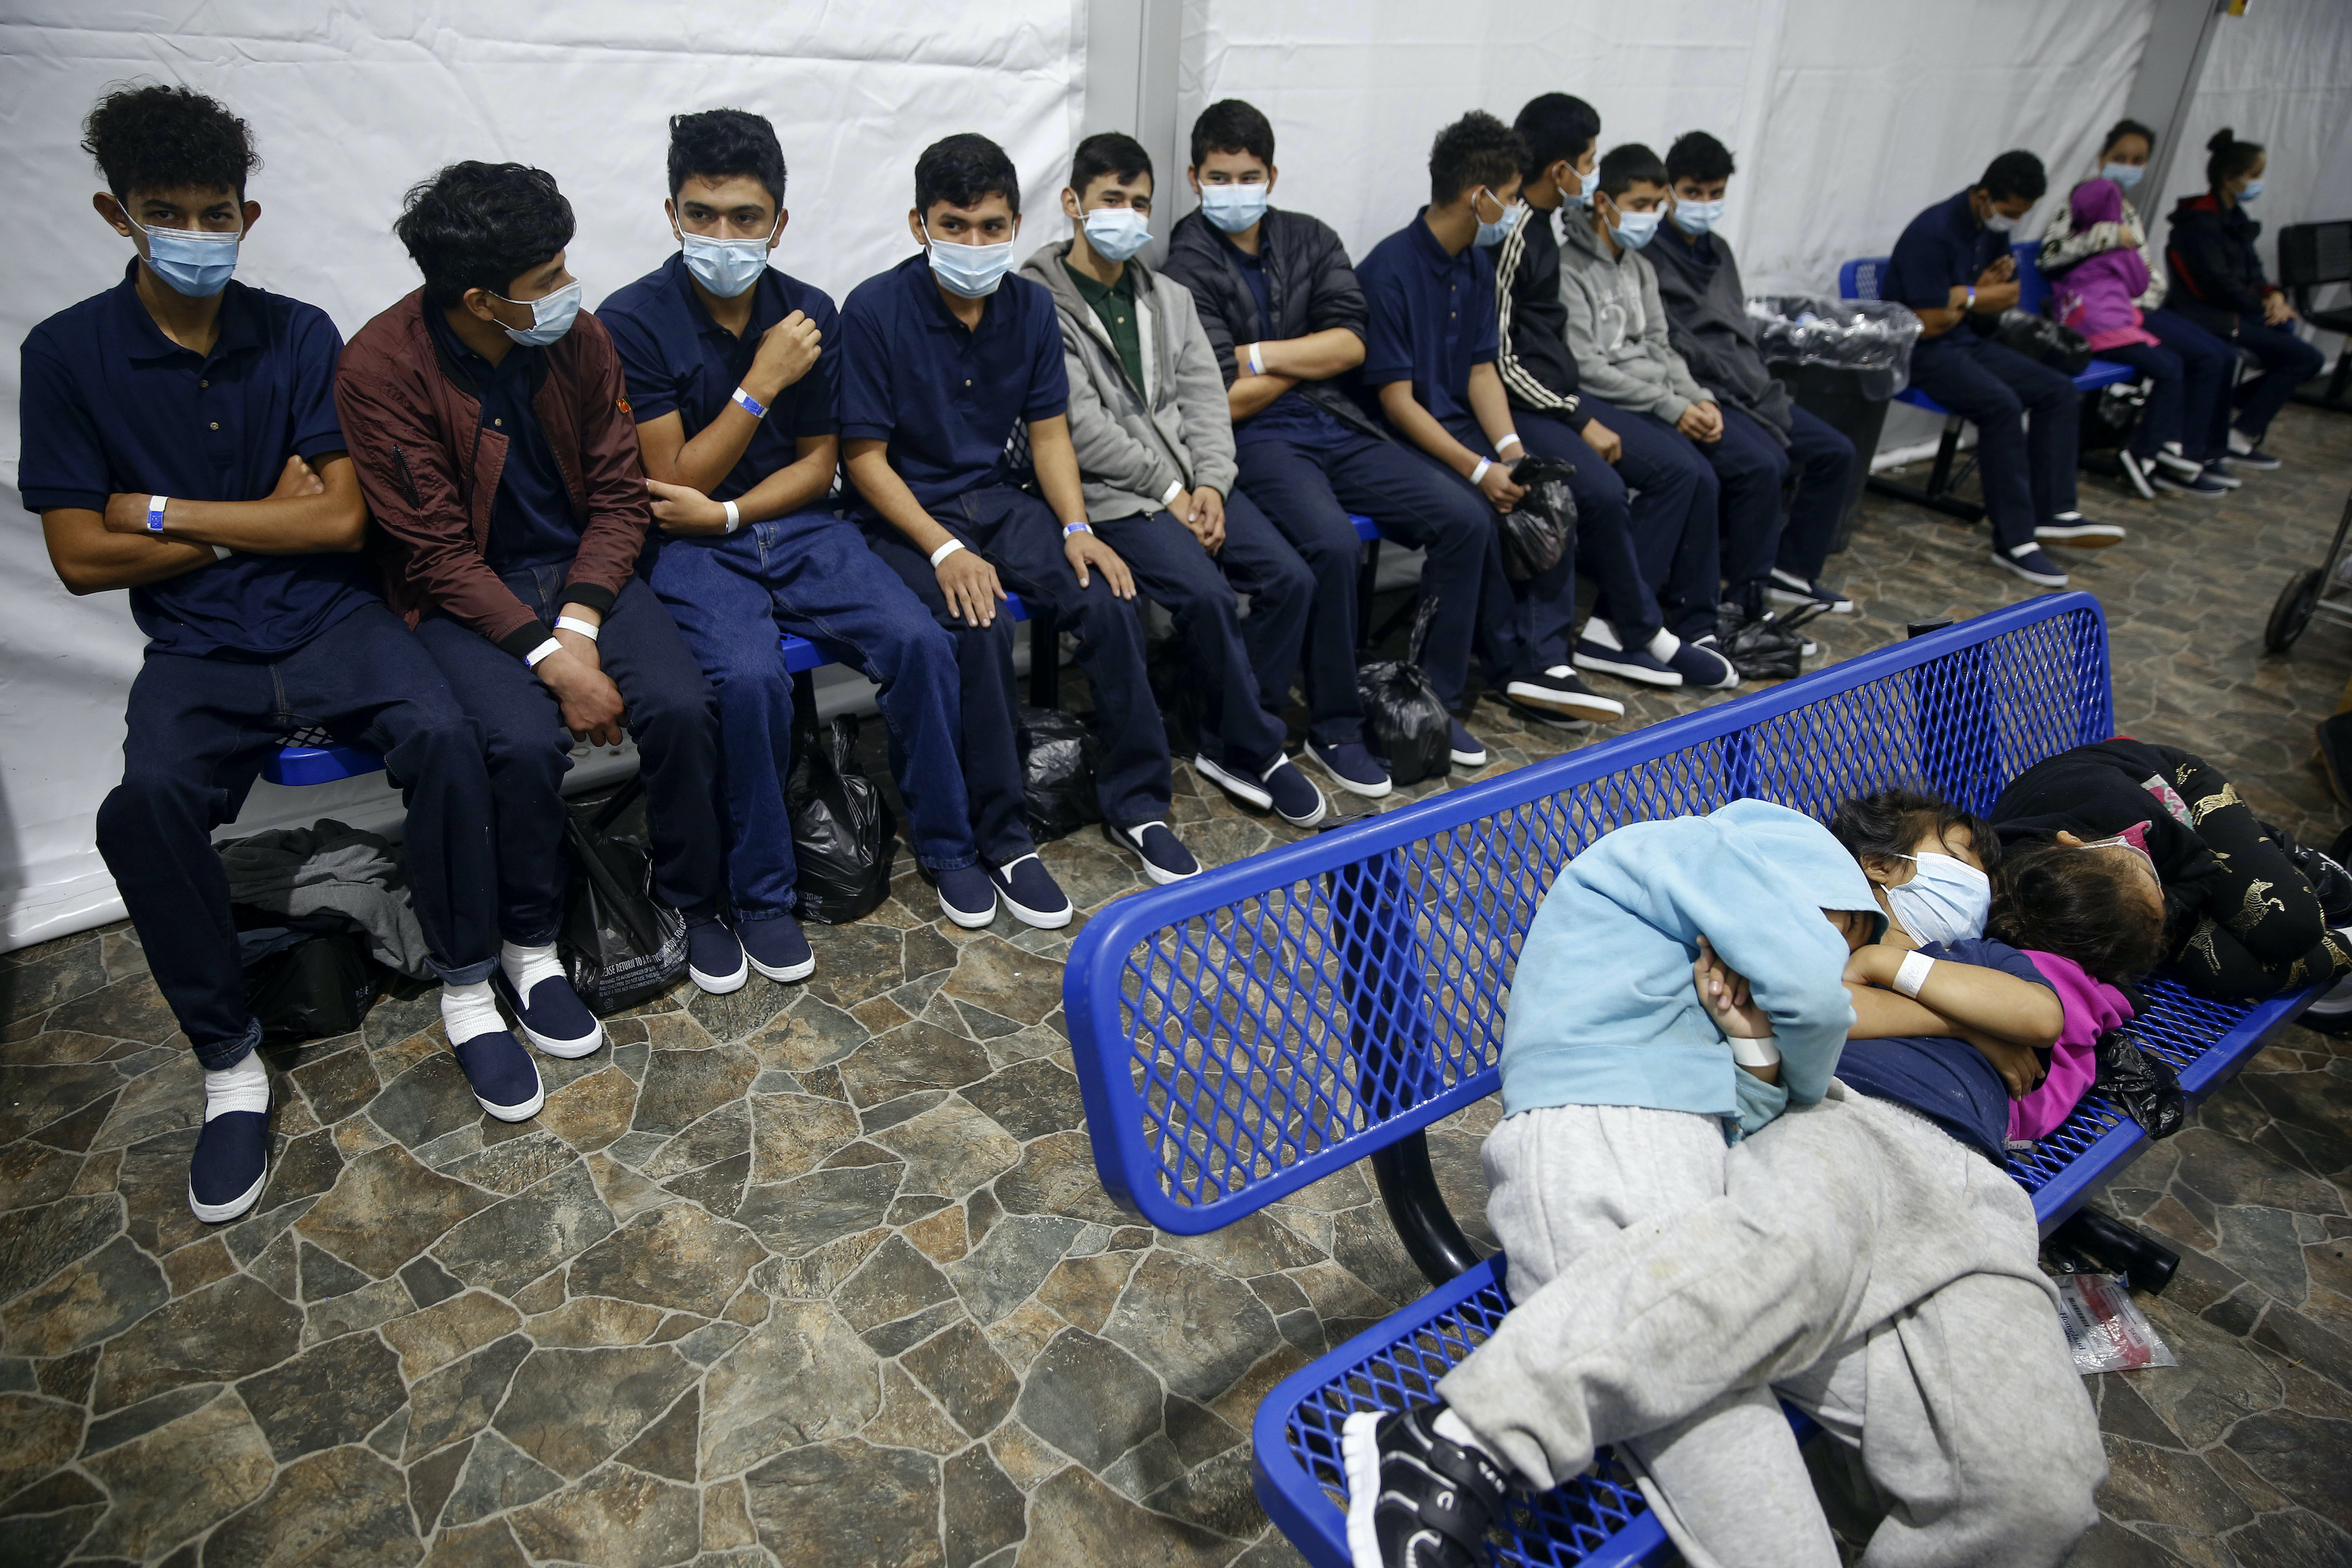 IG Report Finds Multiple Shortcomings in HHS Program That Paired Lone Illegal Alien Children With Adult US Sponsors